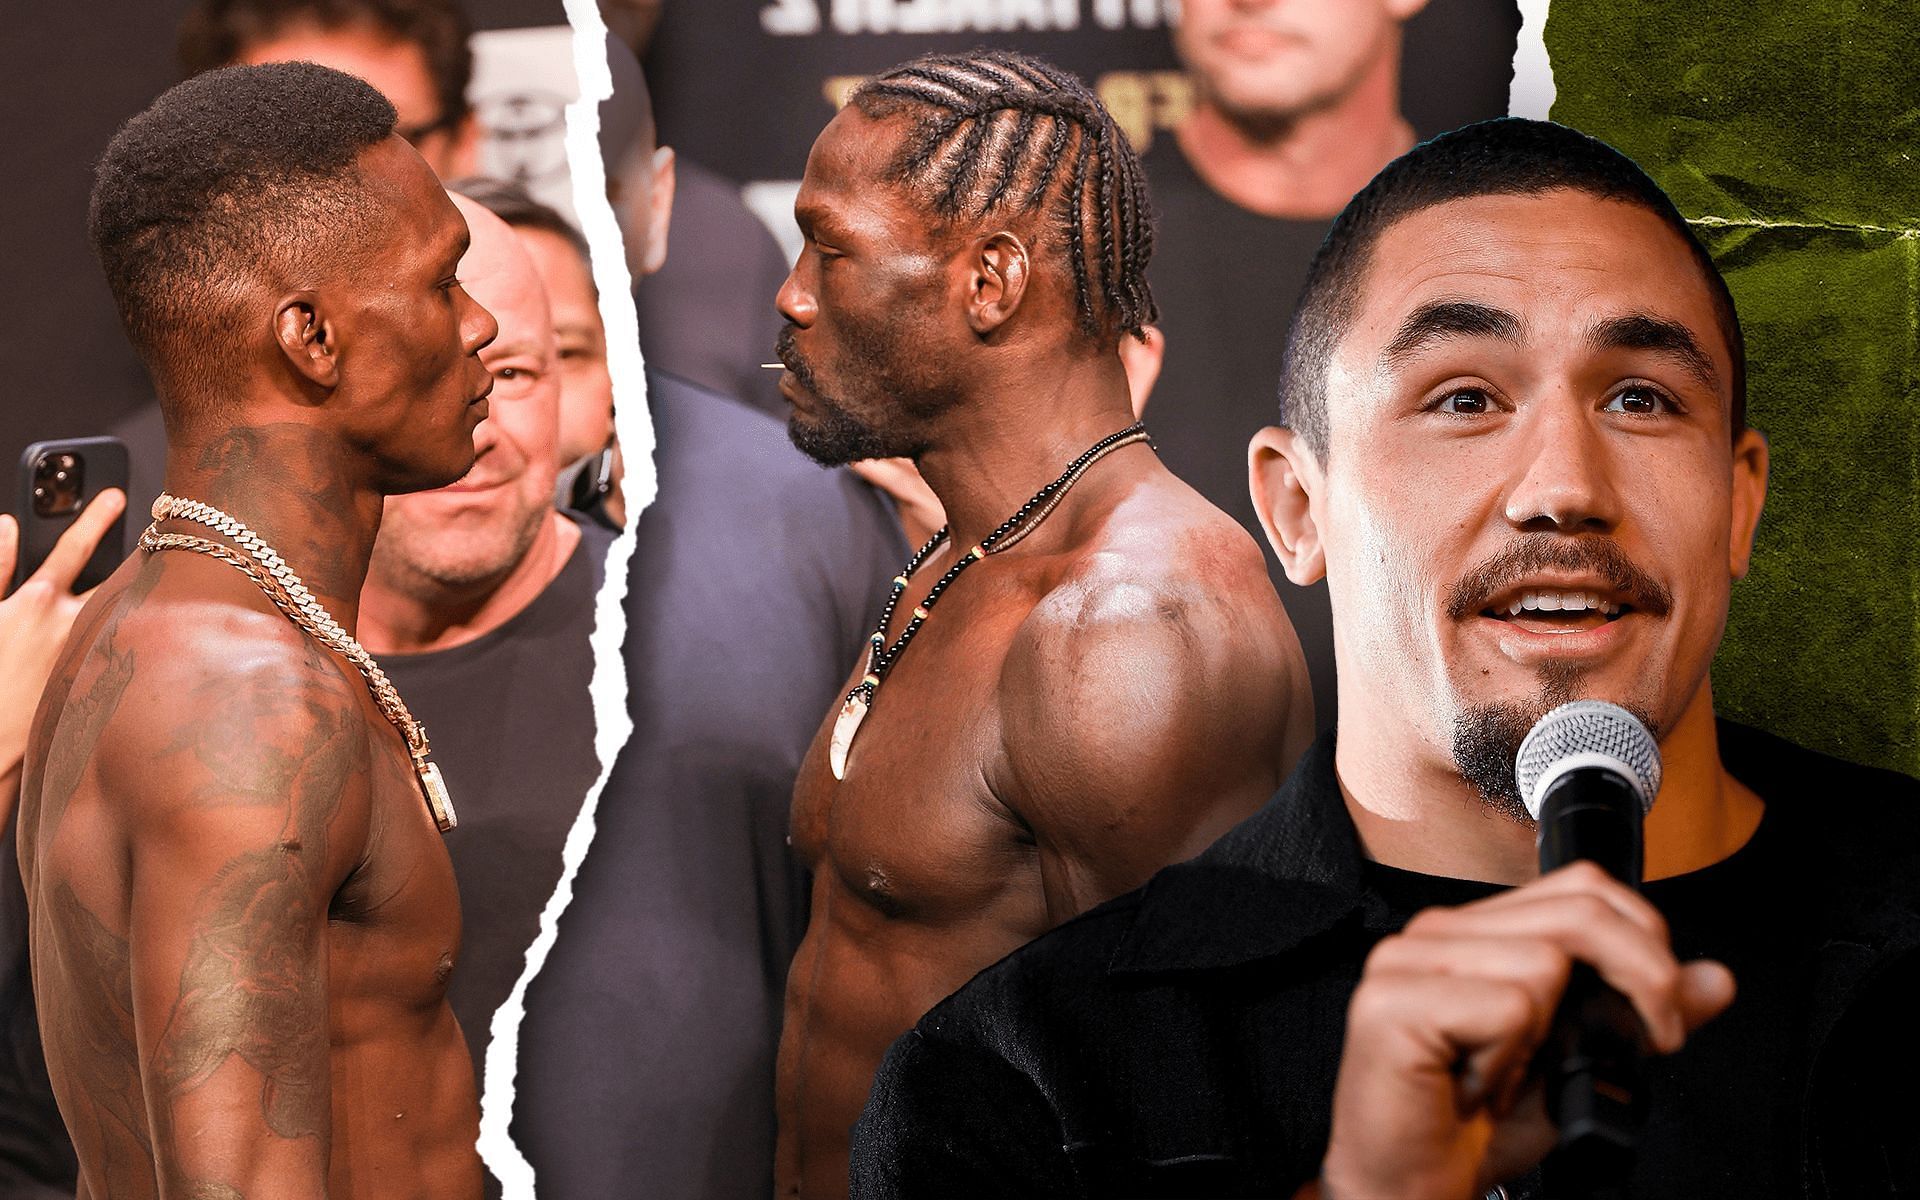 Robert Whittaker (right) previewed a potential fight between Israel Adesanya (left) and Jared Cannonier (center)